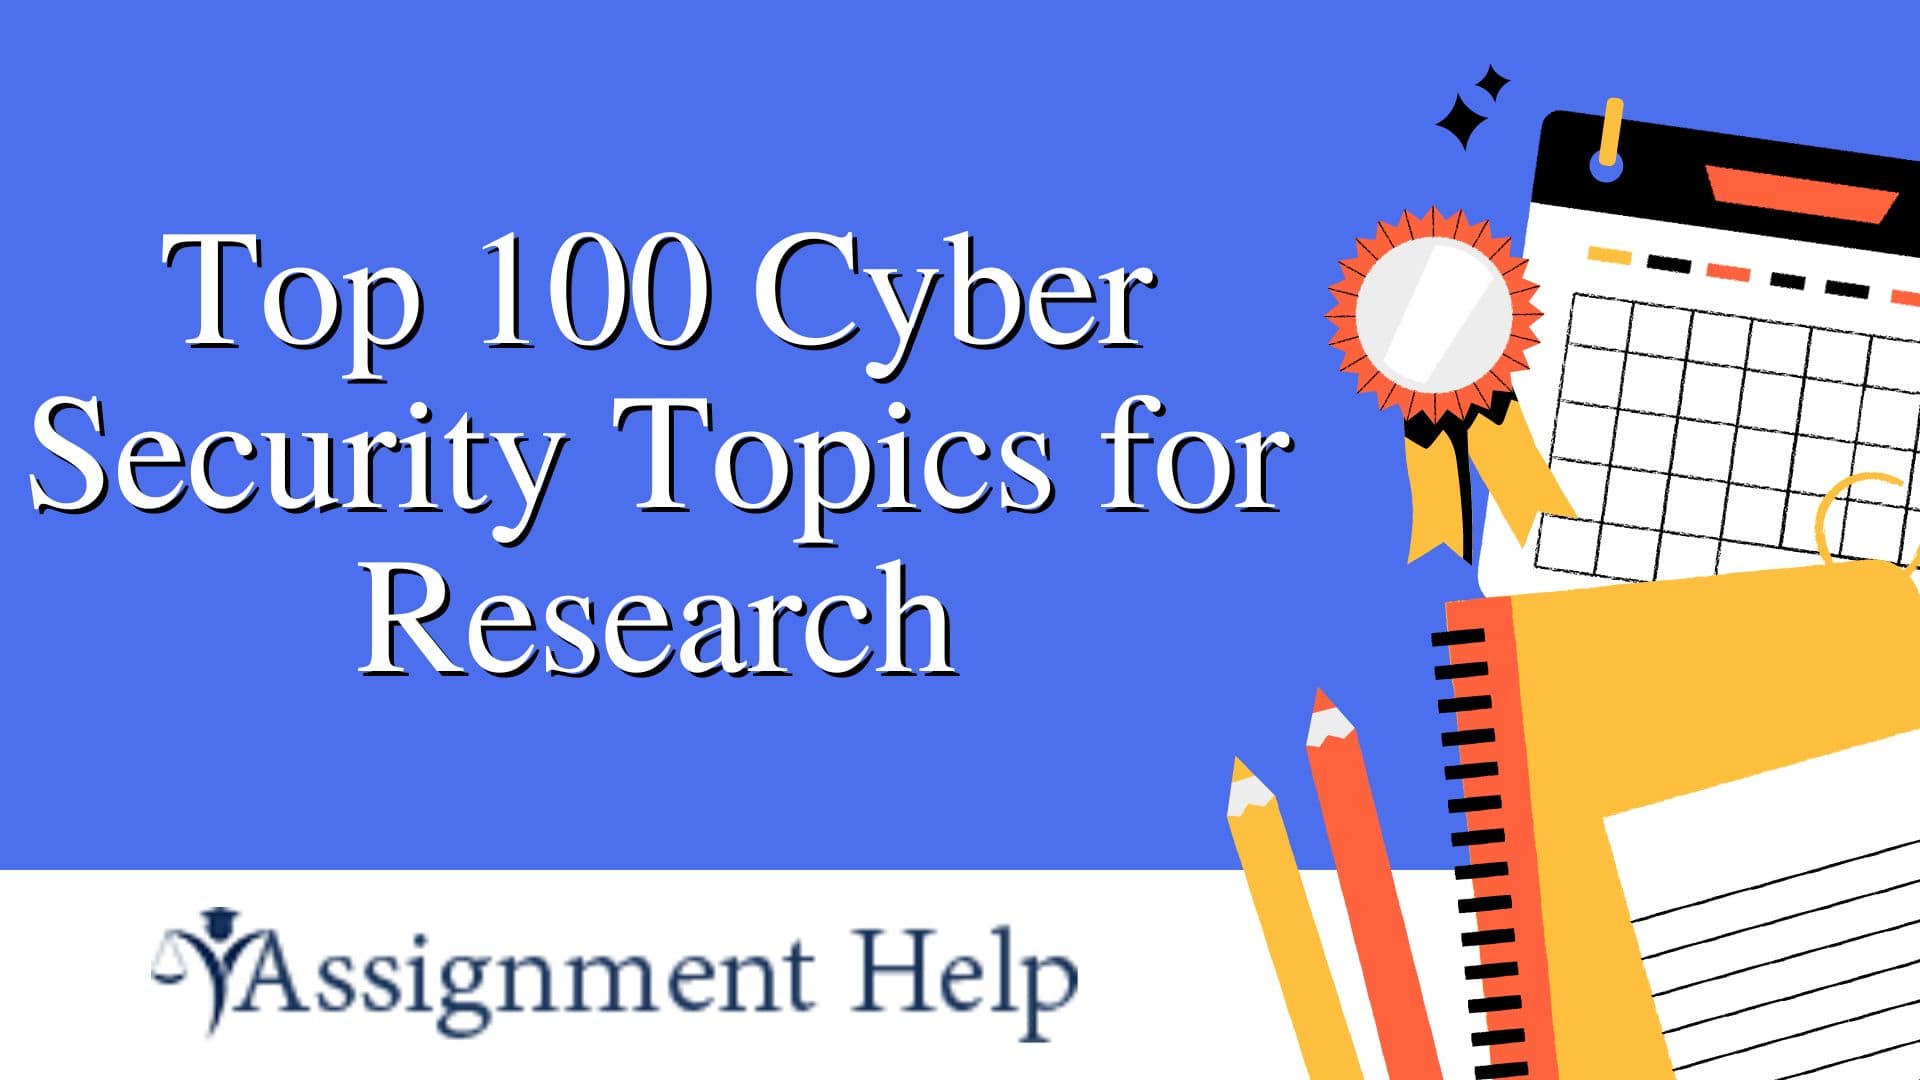 Find Top 100 Cyber Security Research Topics for Your Paper